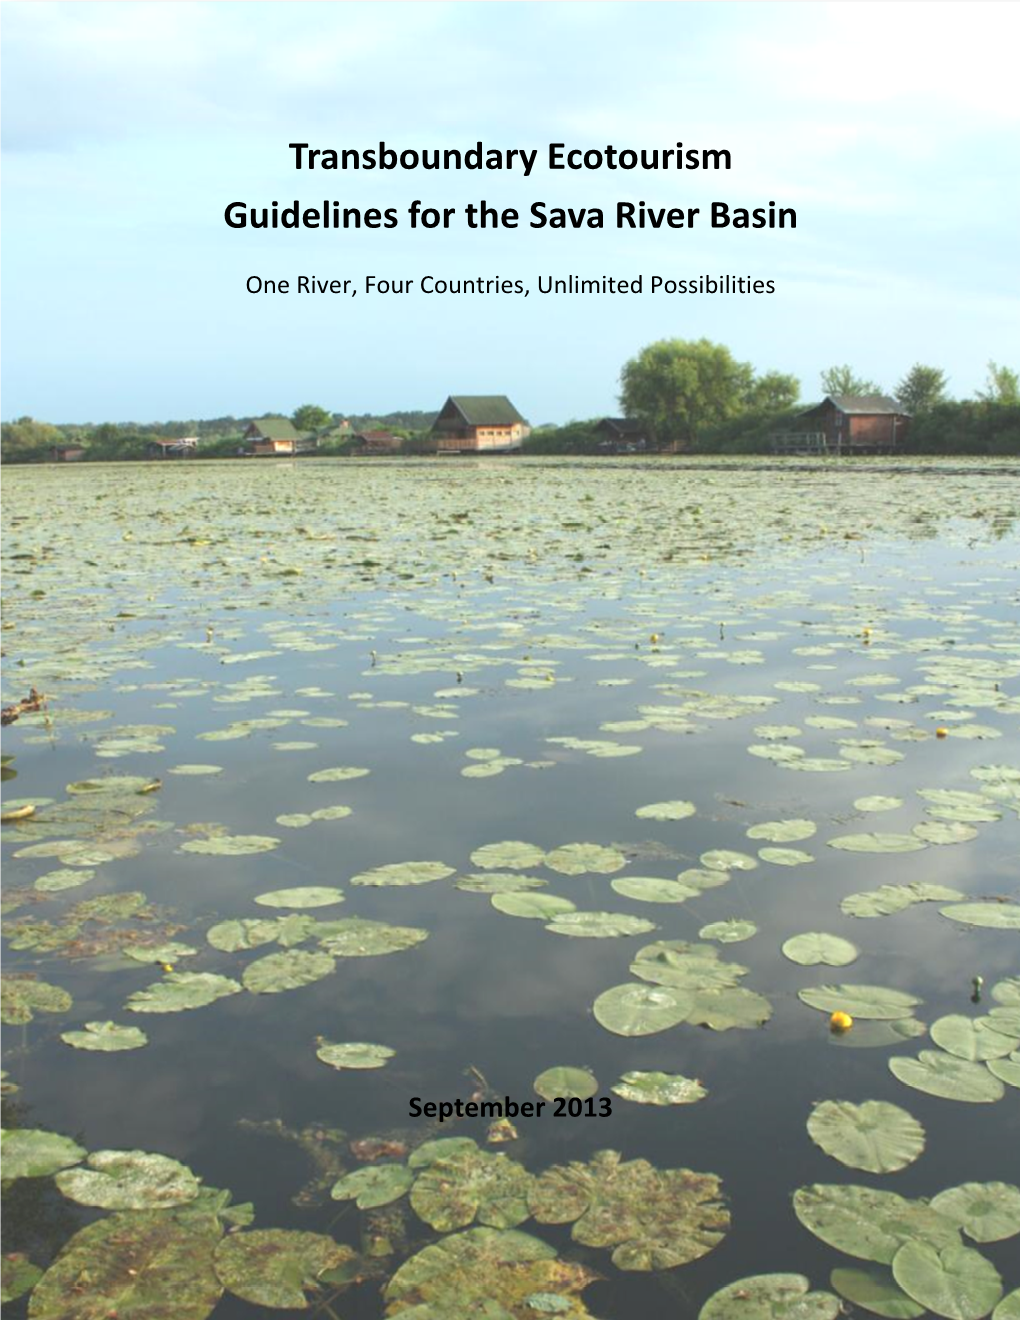 Transboundary Ecotourism Guidelines for the Sava River Basin